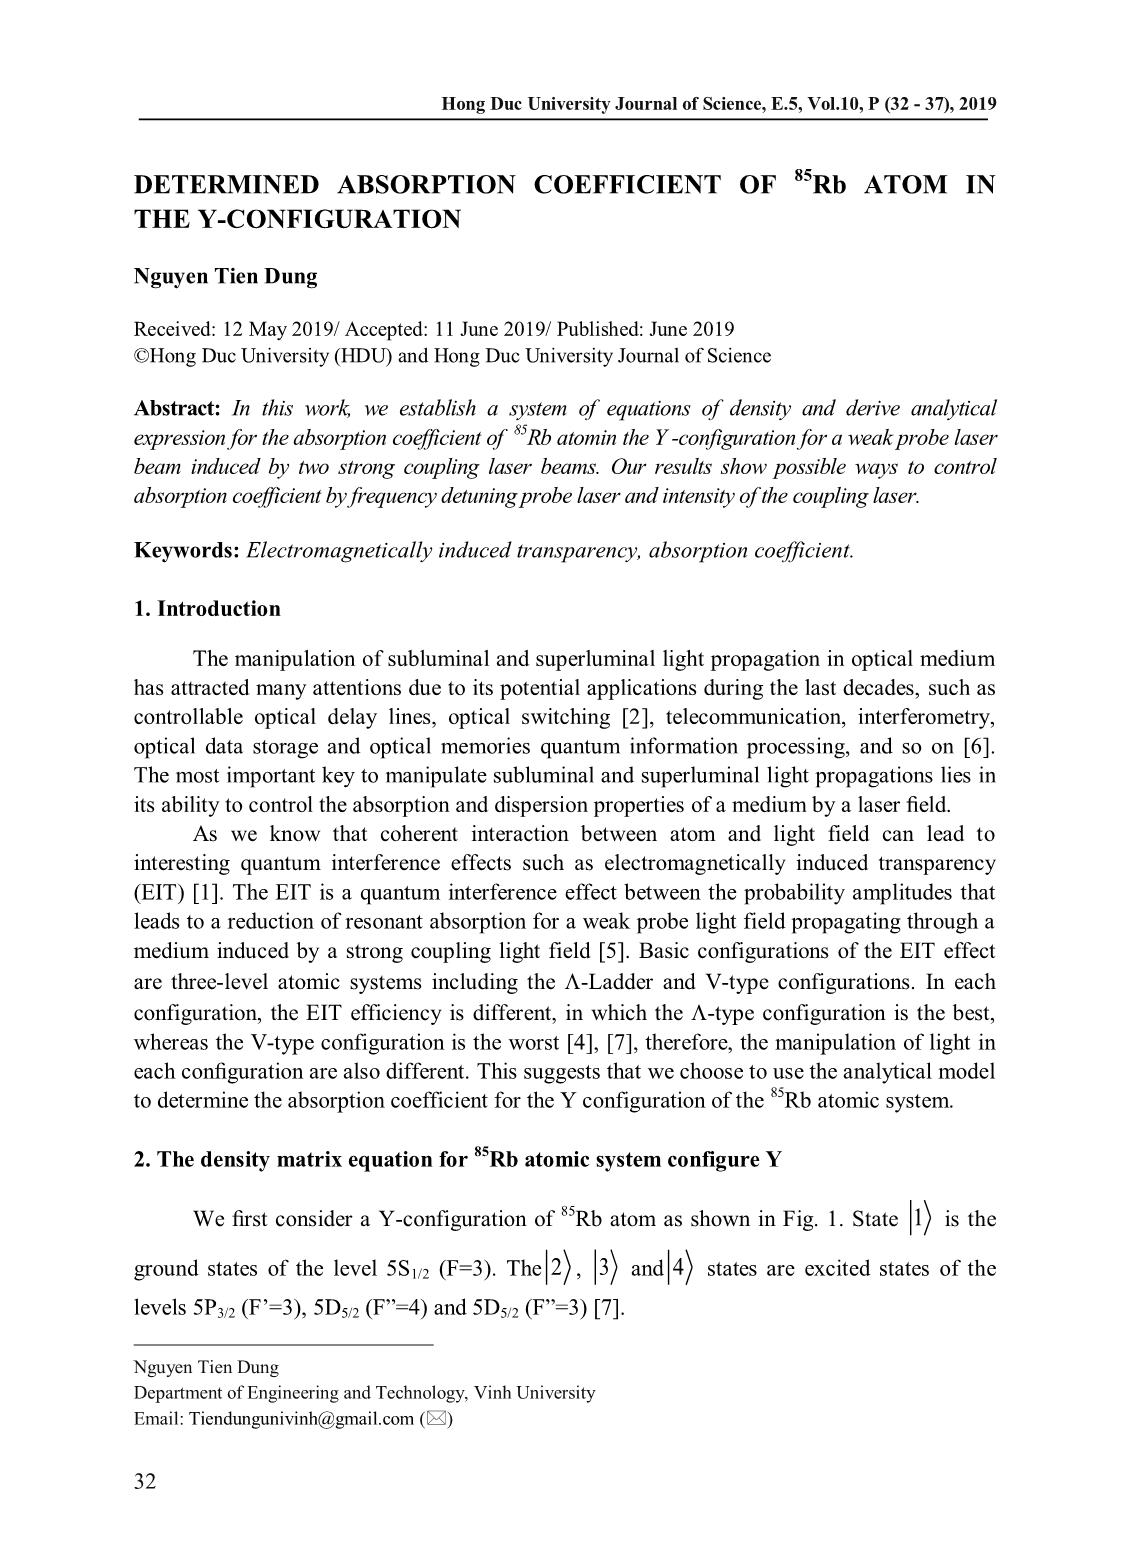 Determined absorption coefficient of 85Rb atom in the y-configuration trang 1